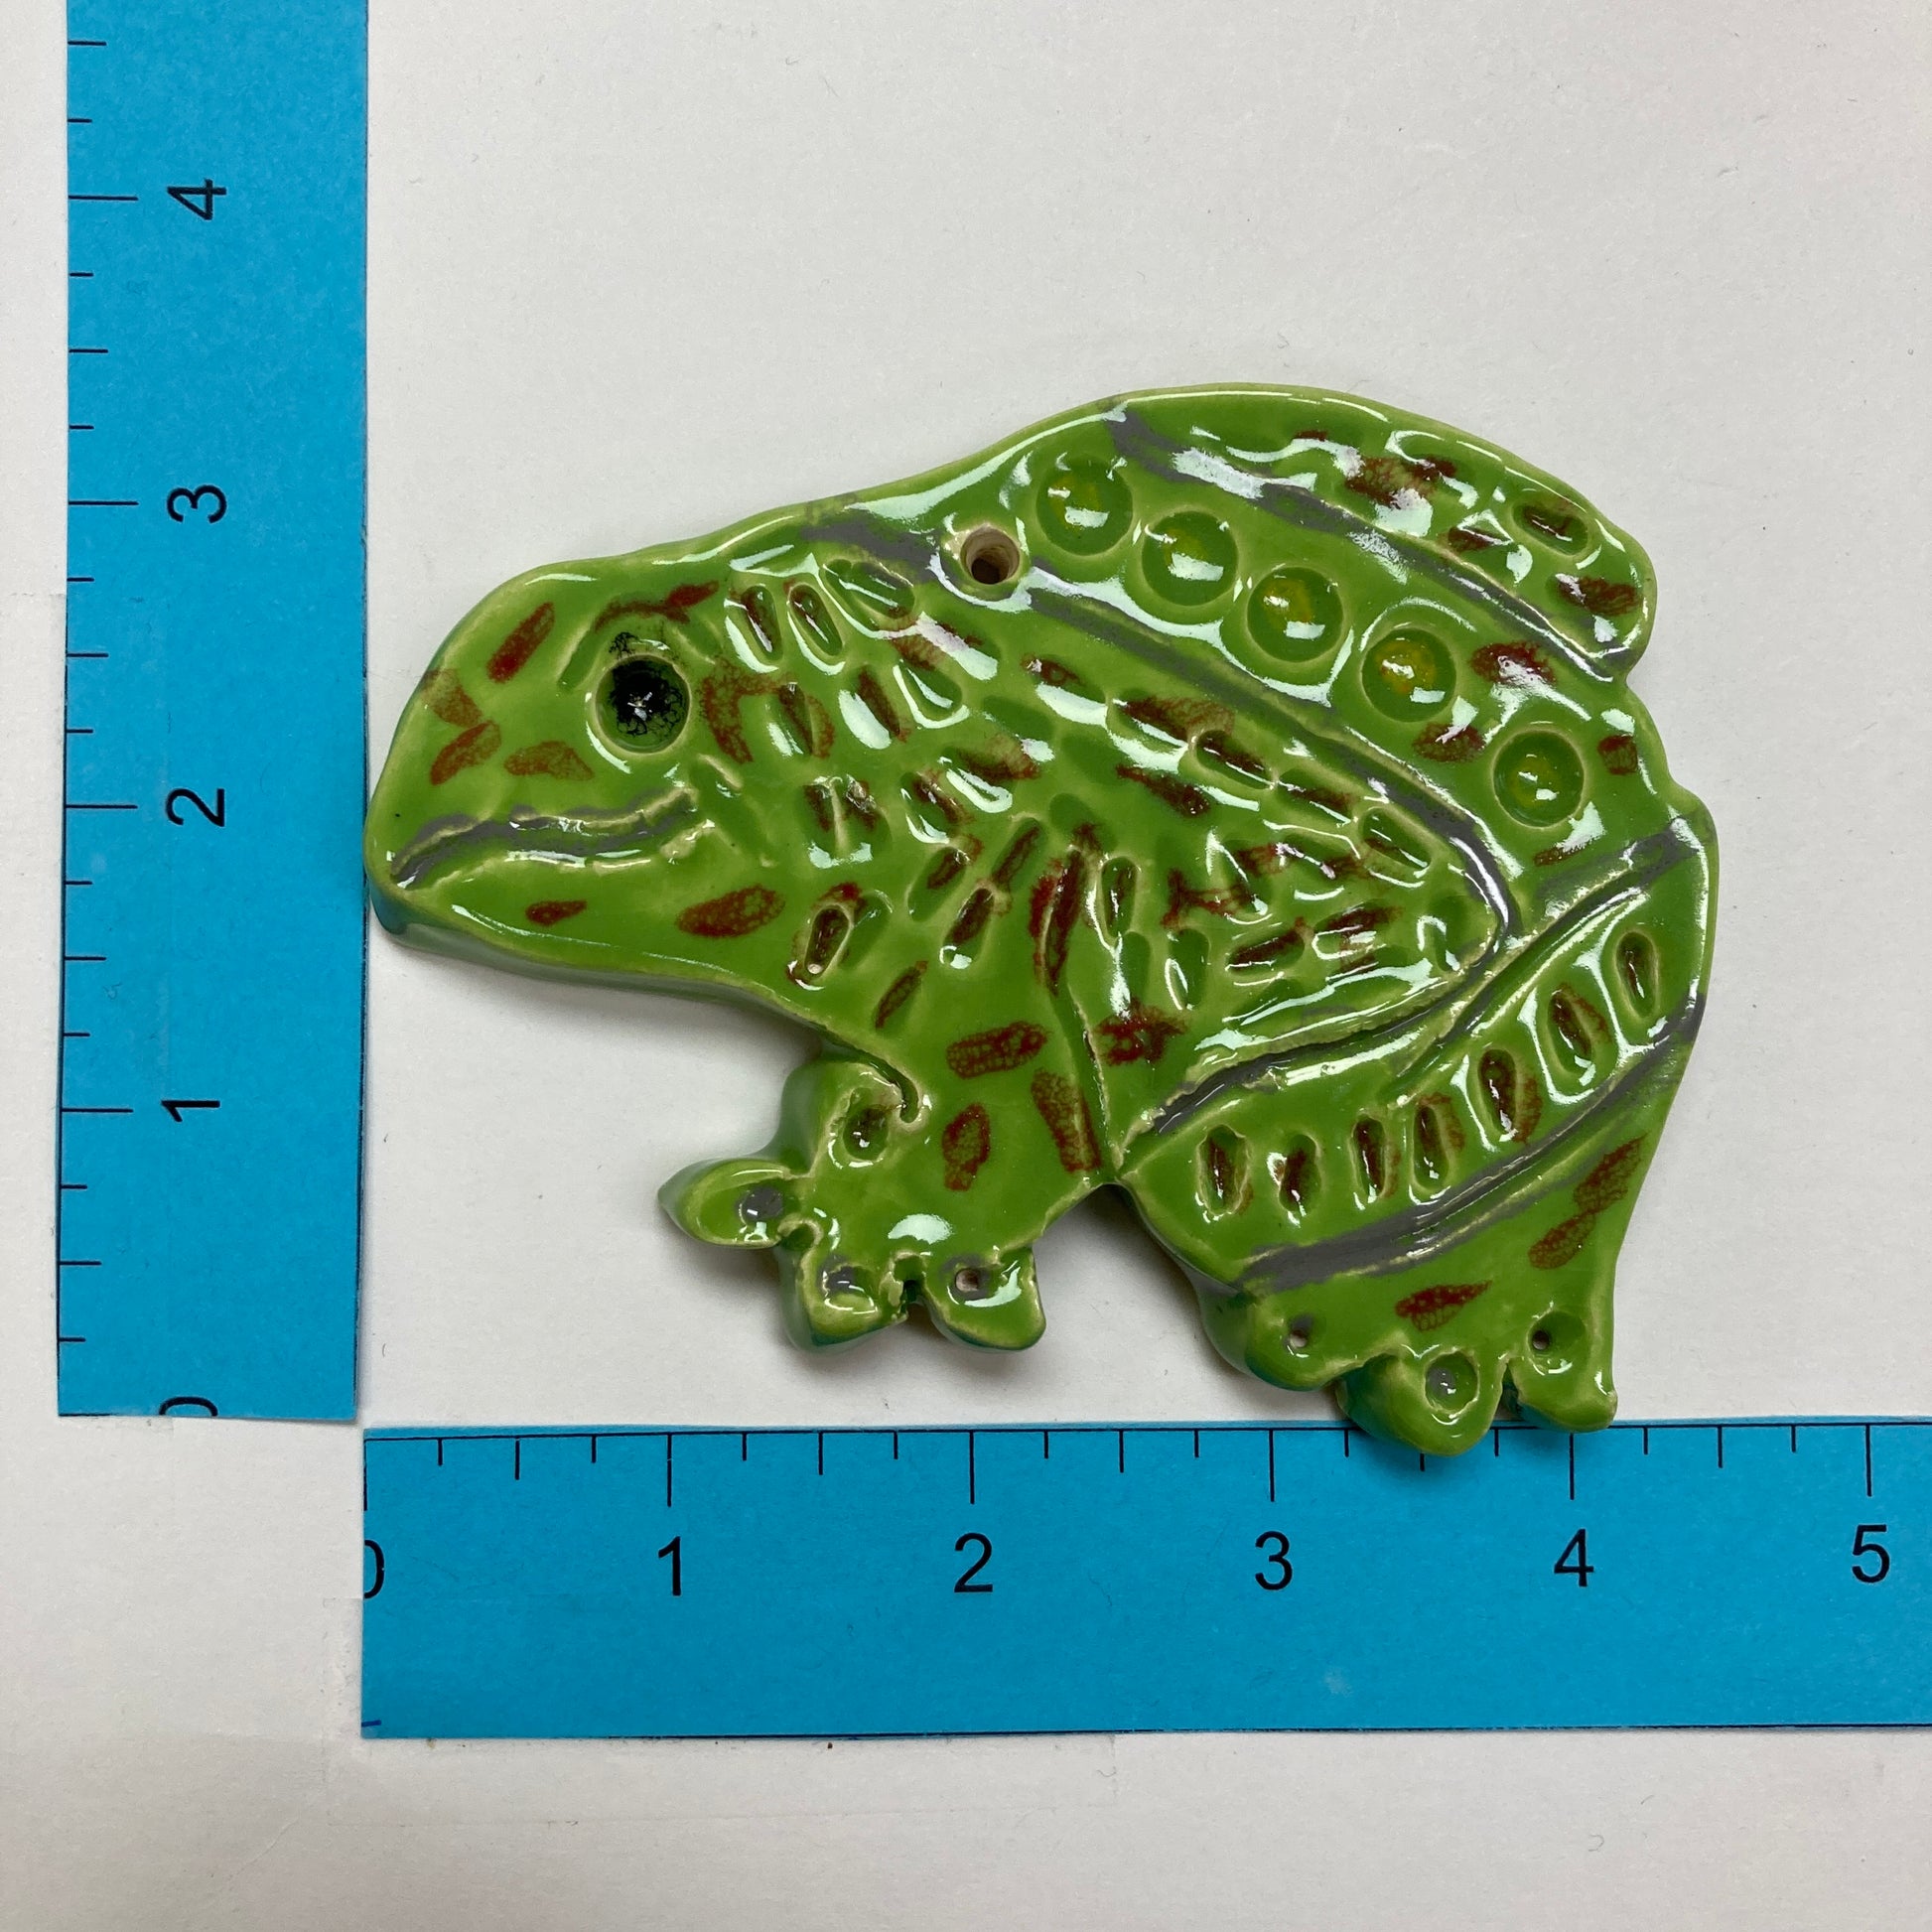 WATCH Resources Art Guild - Ceramic Arts Handmade Clay Crafts 4.5-inch x 3.5-inch Glazed Frog made by Emily Knoles